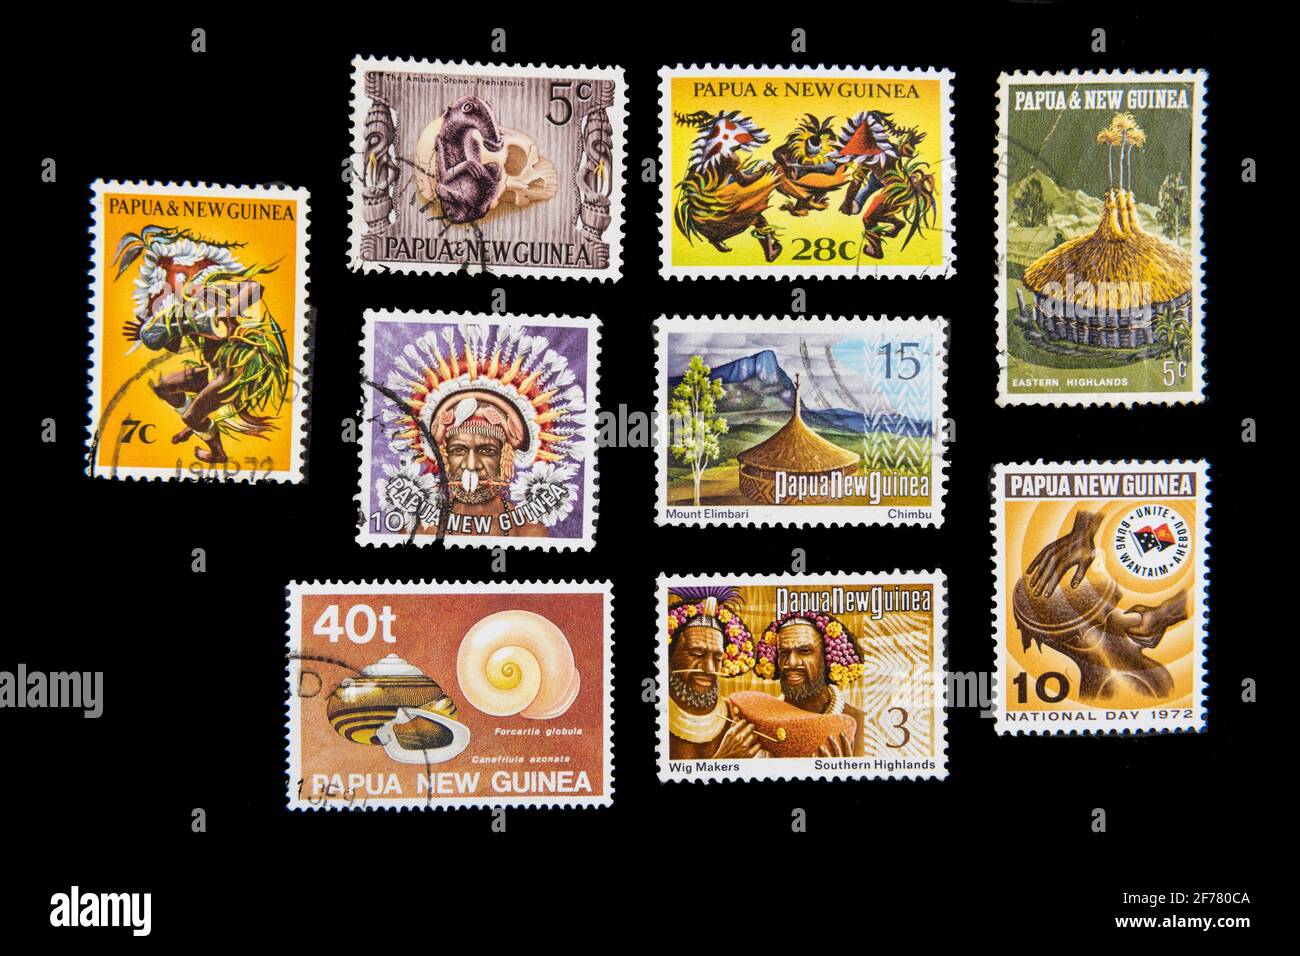 Papua New Guinea, Port Moresby, stamps, traditionnal body attire Stock Photo